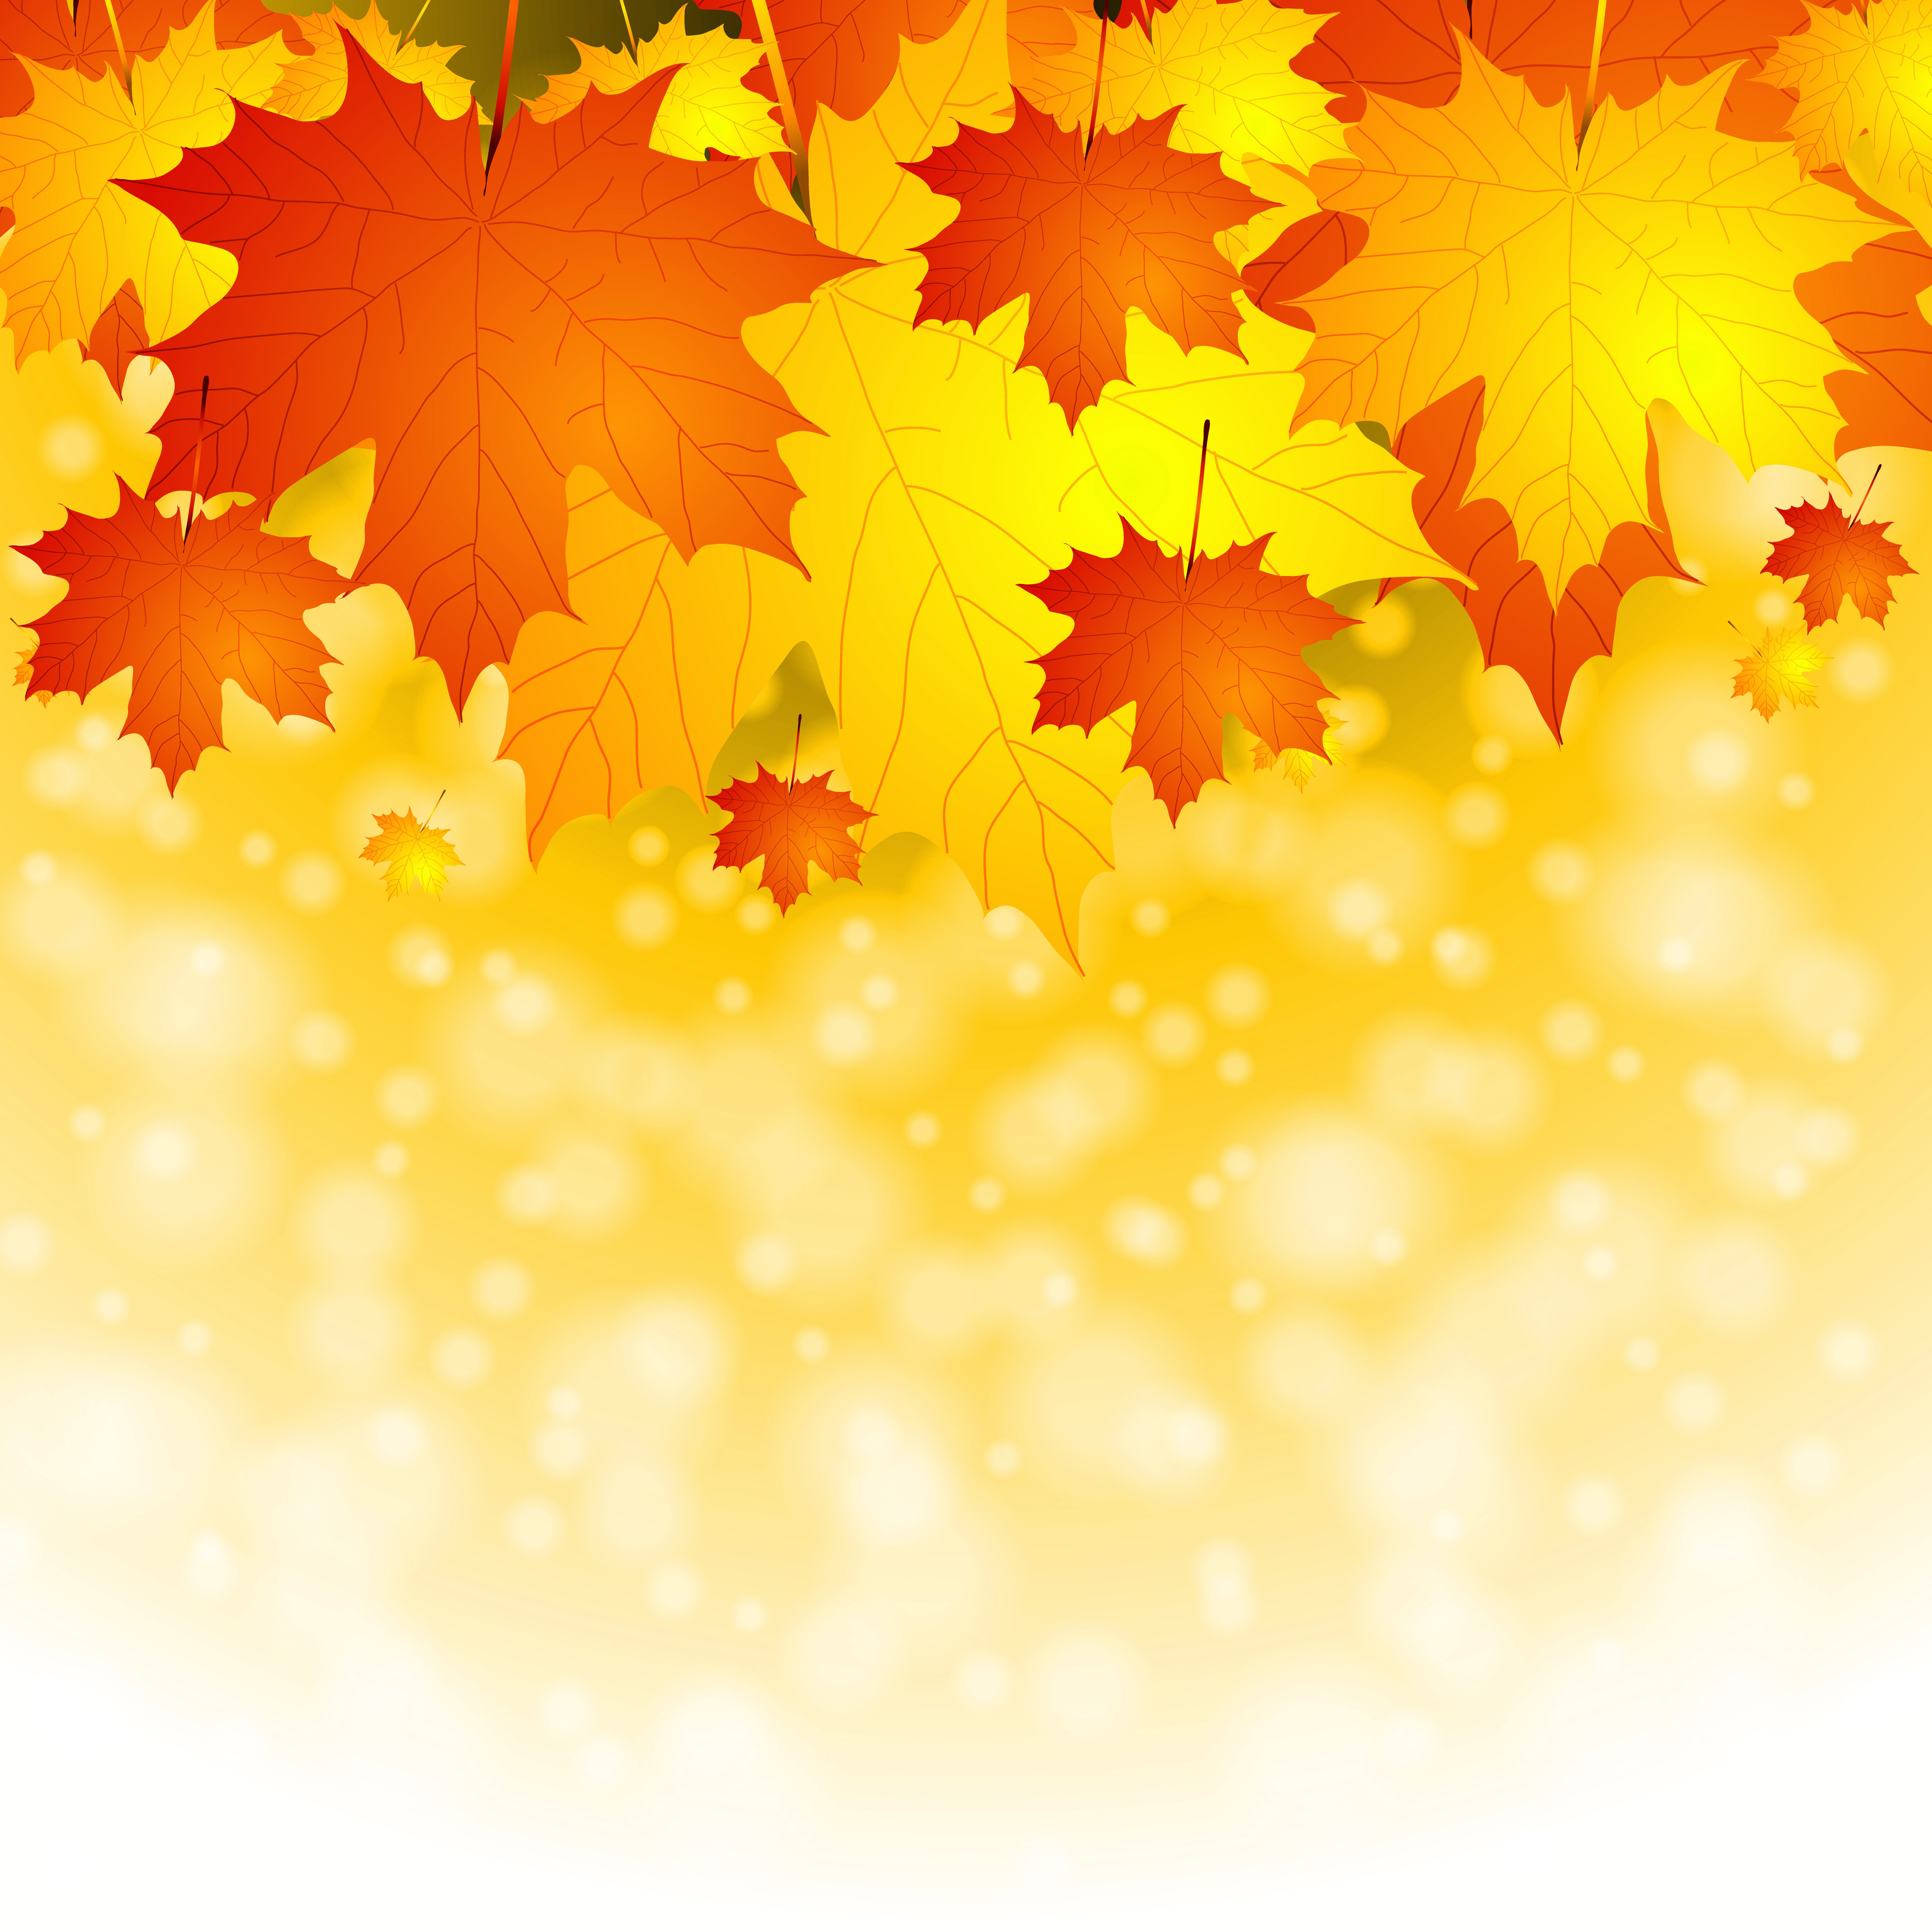 Fall Leaf Backgrounds Group 